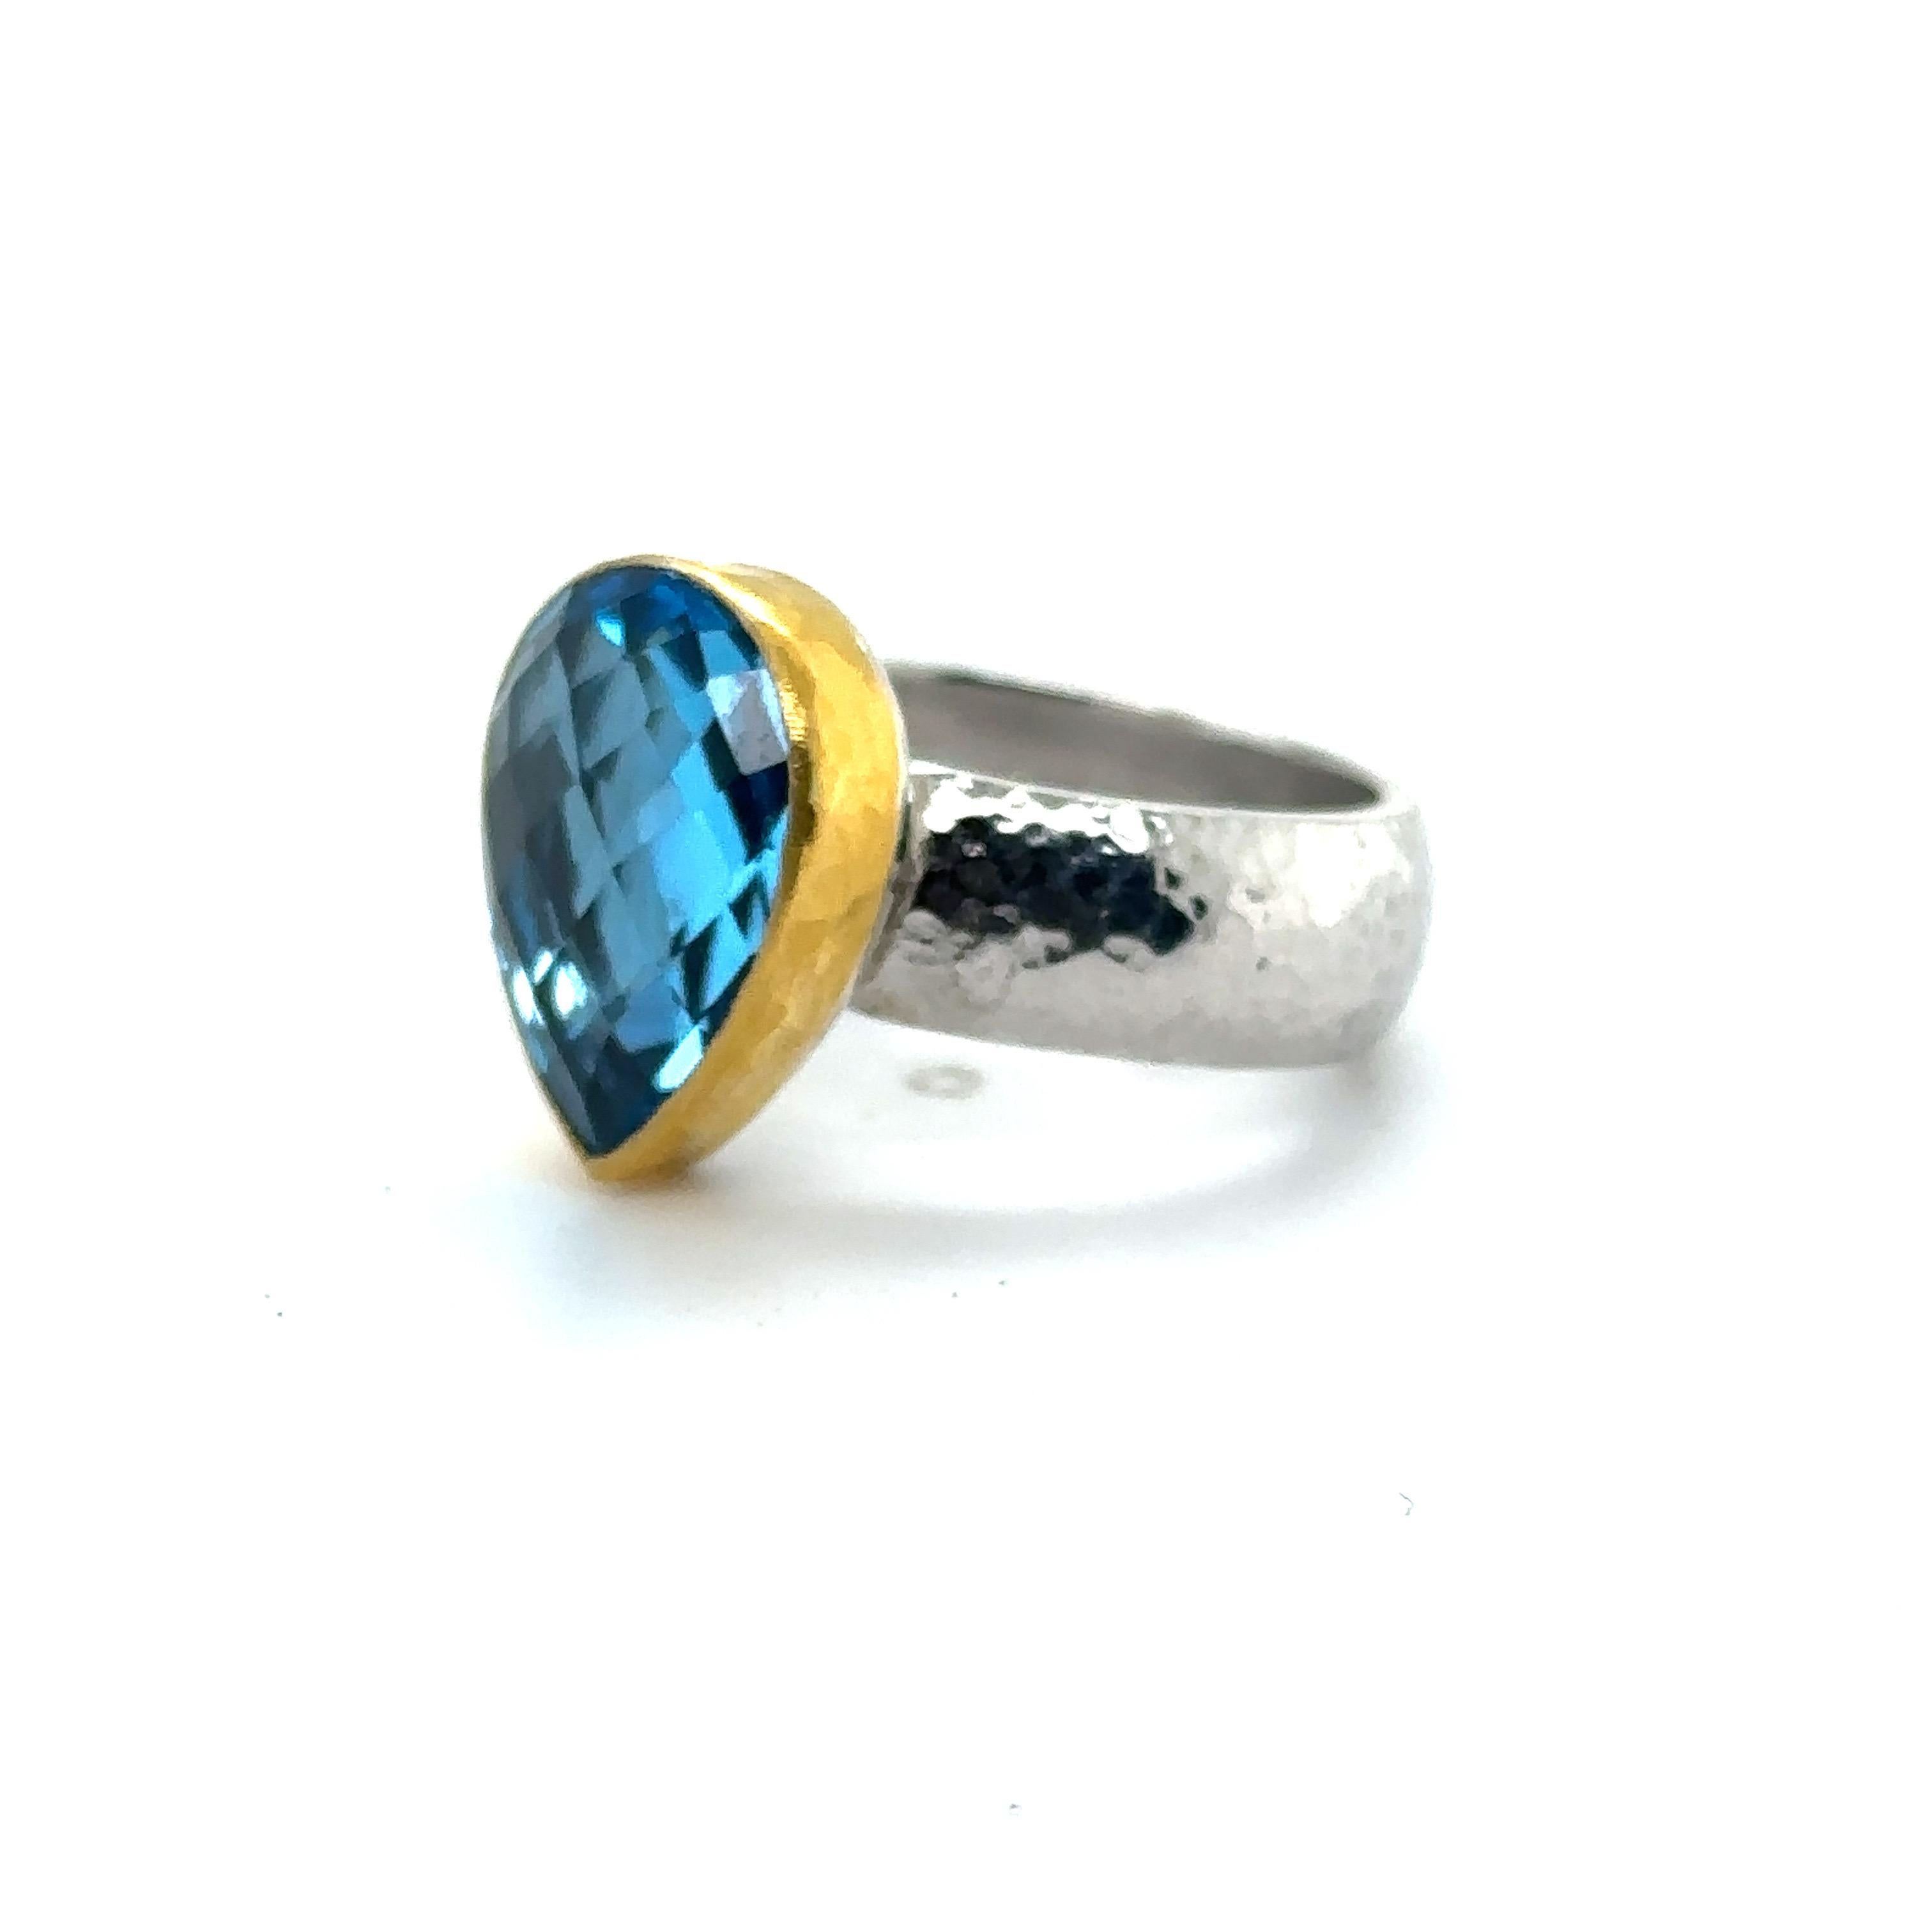 JAS-19-1918 - 24KT GOLD/SS RING with PEAR SHAPE SWISS BLUE TOPAZ For Sale 3